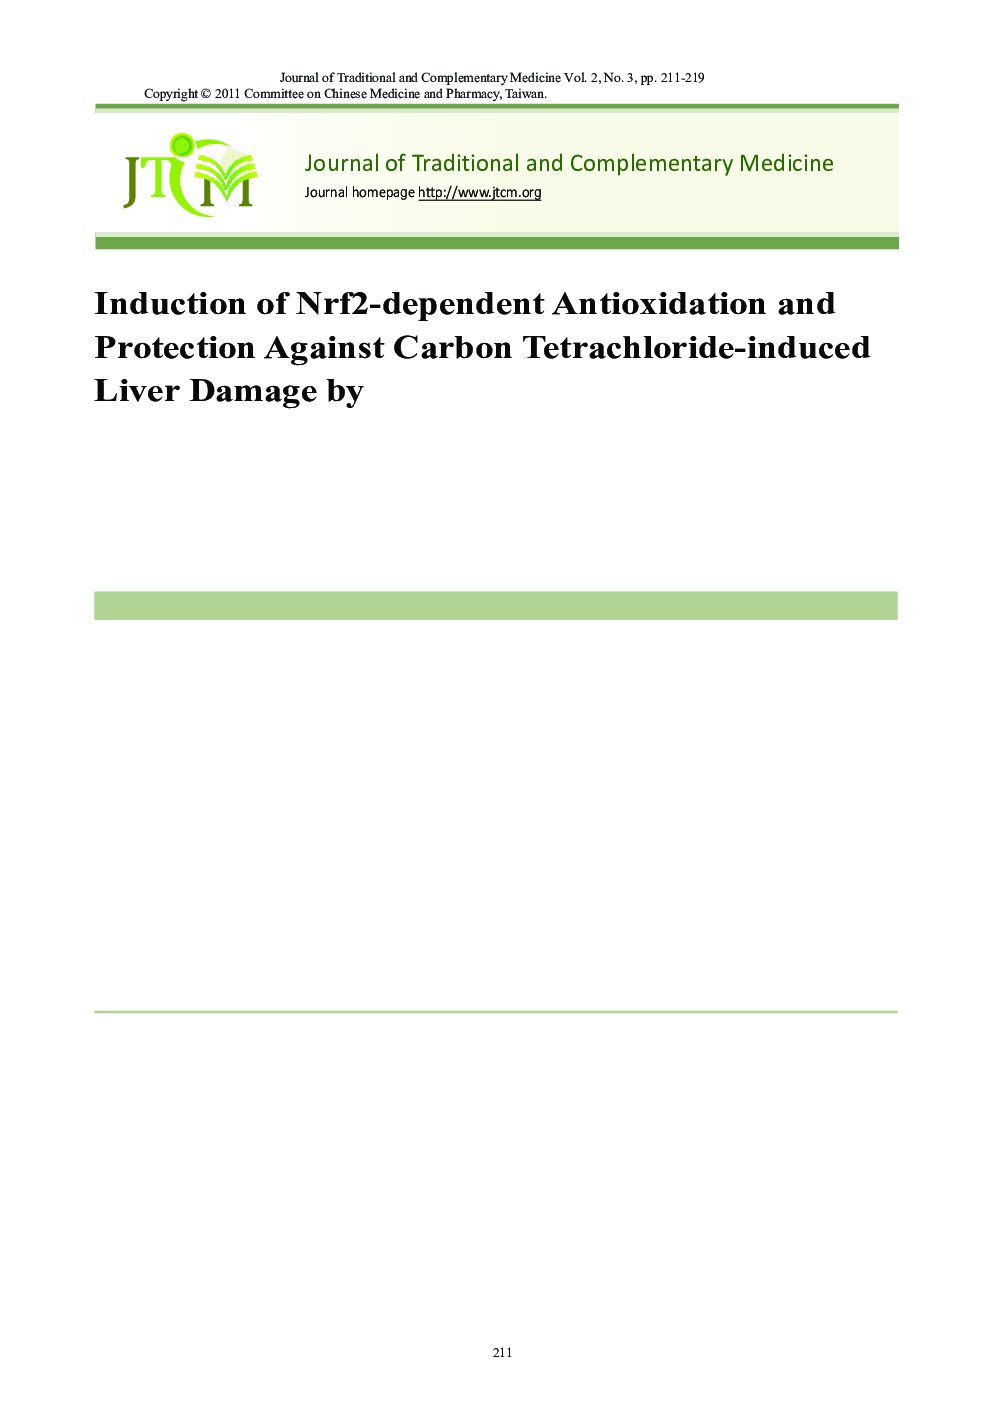 Induction of Nrf2-dependent Antioxidation and Protection Against Carbon Tetrachloride-induced Liver Damage by Andrographis Herba (穿心蓮chuān xīn lián) Ethanolic Extract